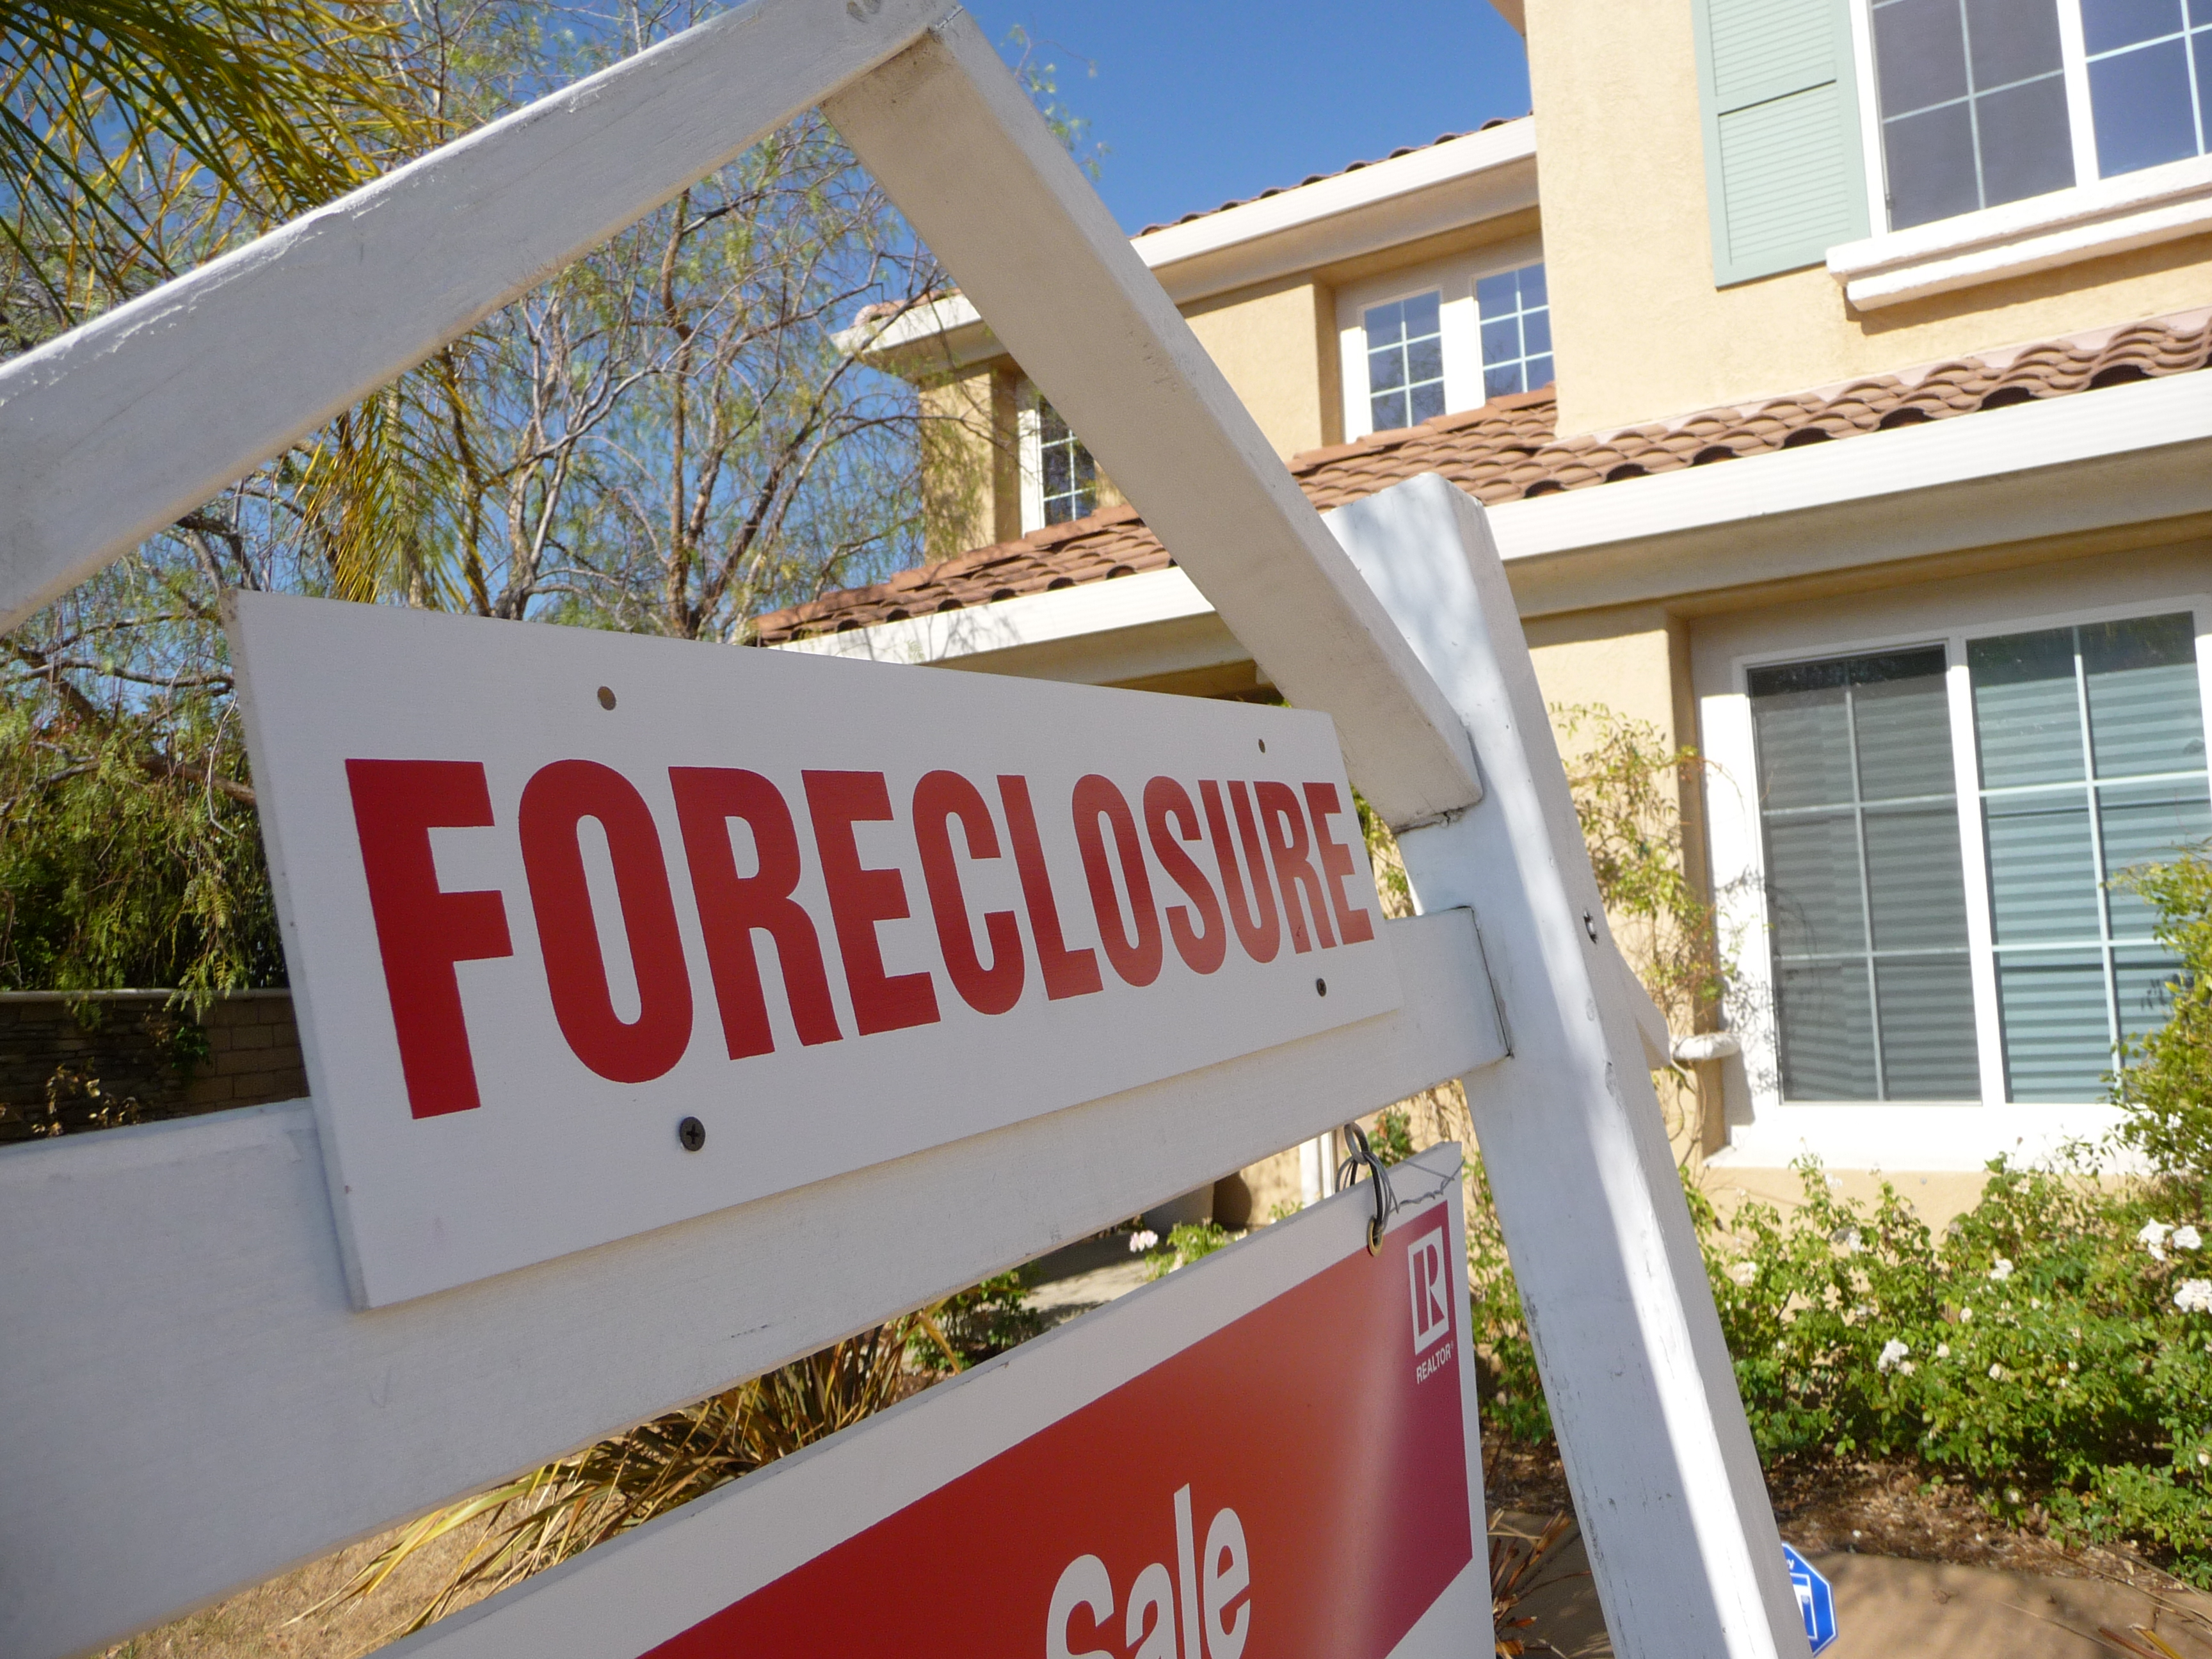 Foreclosure sign. (Credit: Wikimedia Commons)